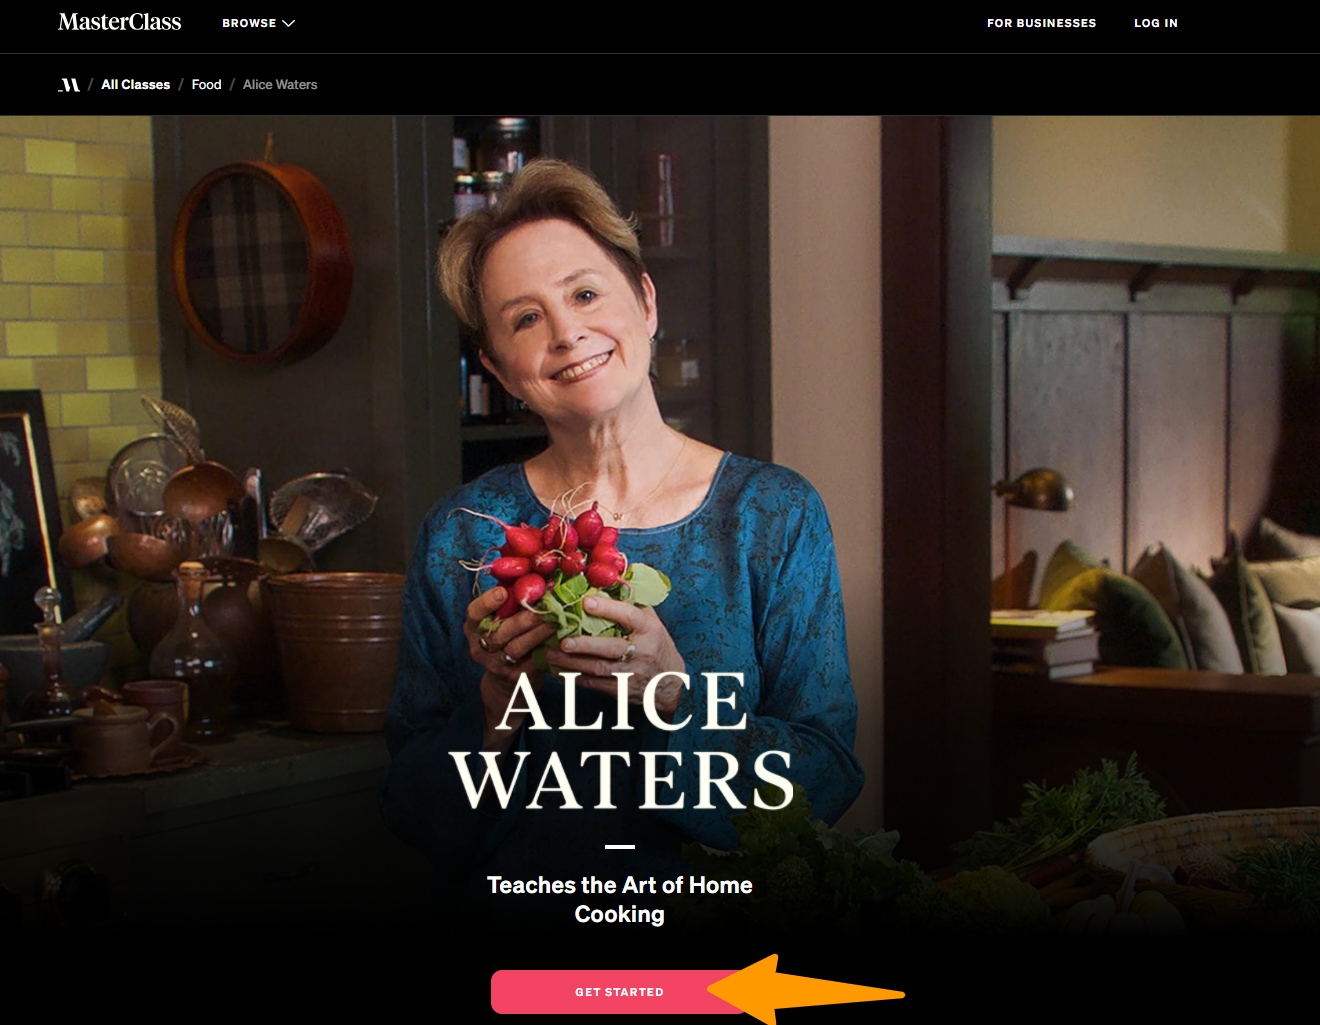 Alice-Waters-Teaches-Cooking-MasterClass